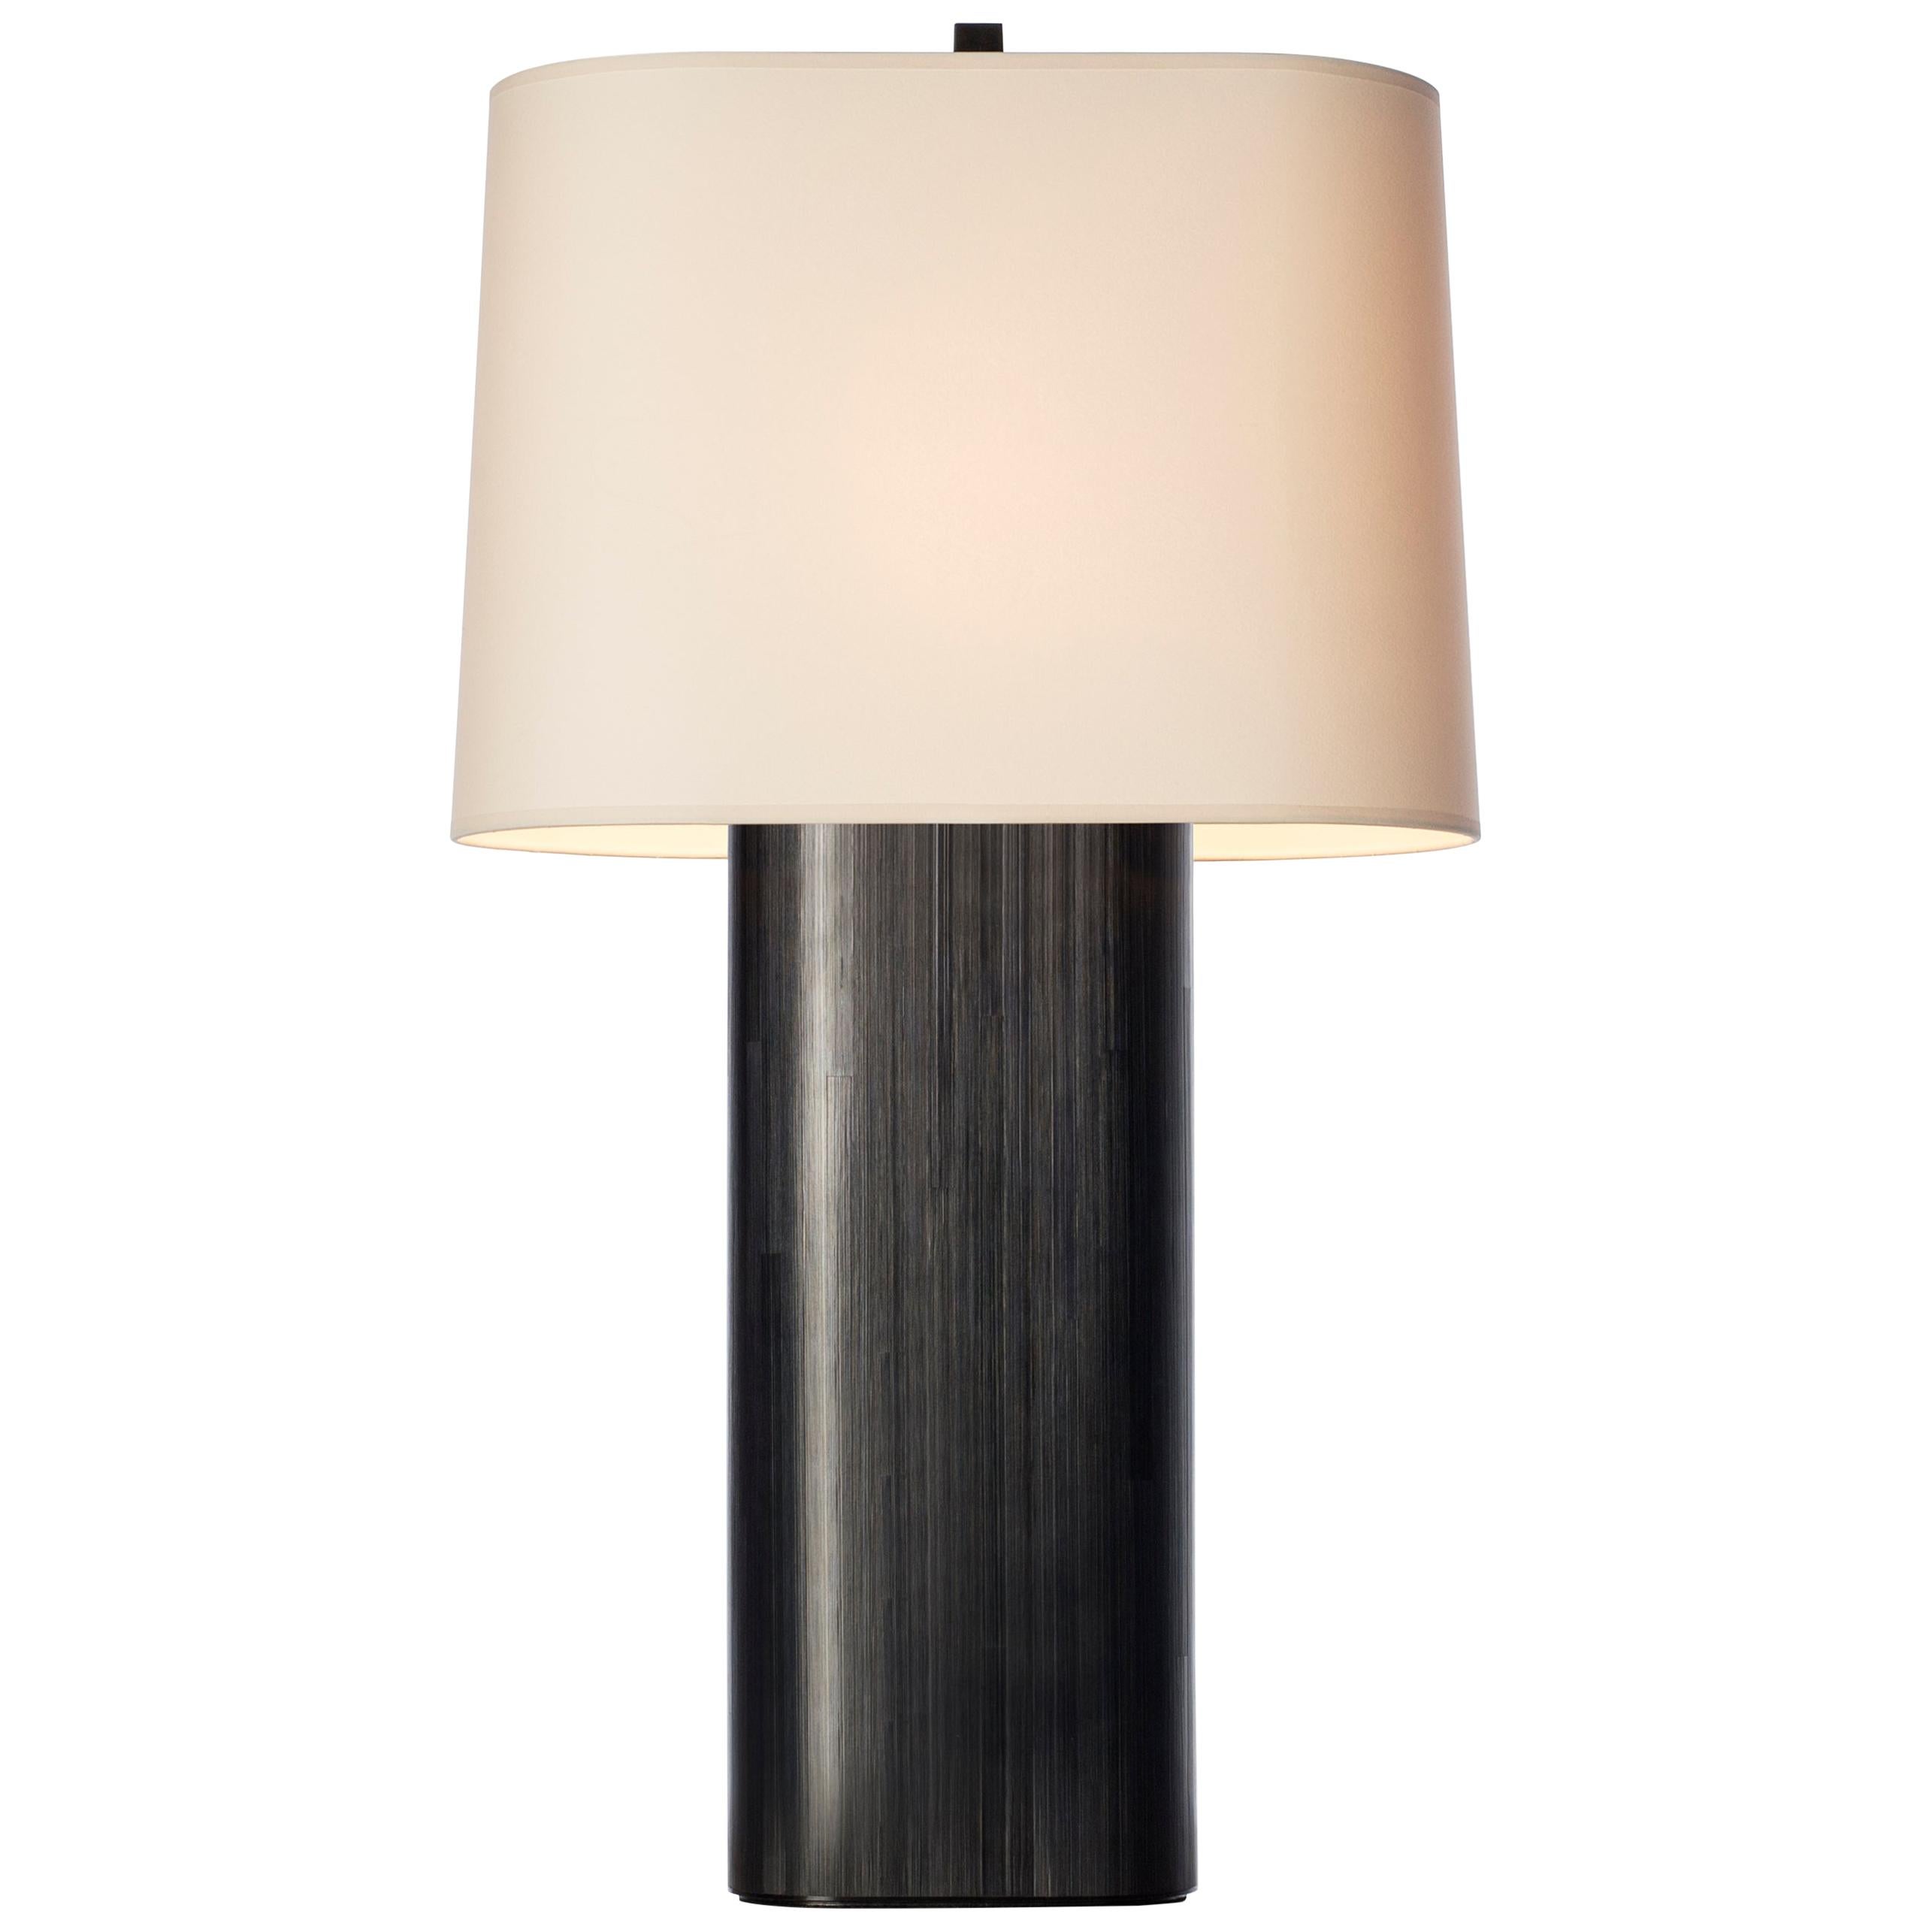 HOLLY HUNT Marlowe Table Lamp with Ebony Straw Marquetry with Aquarelle Shade